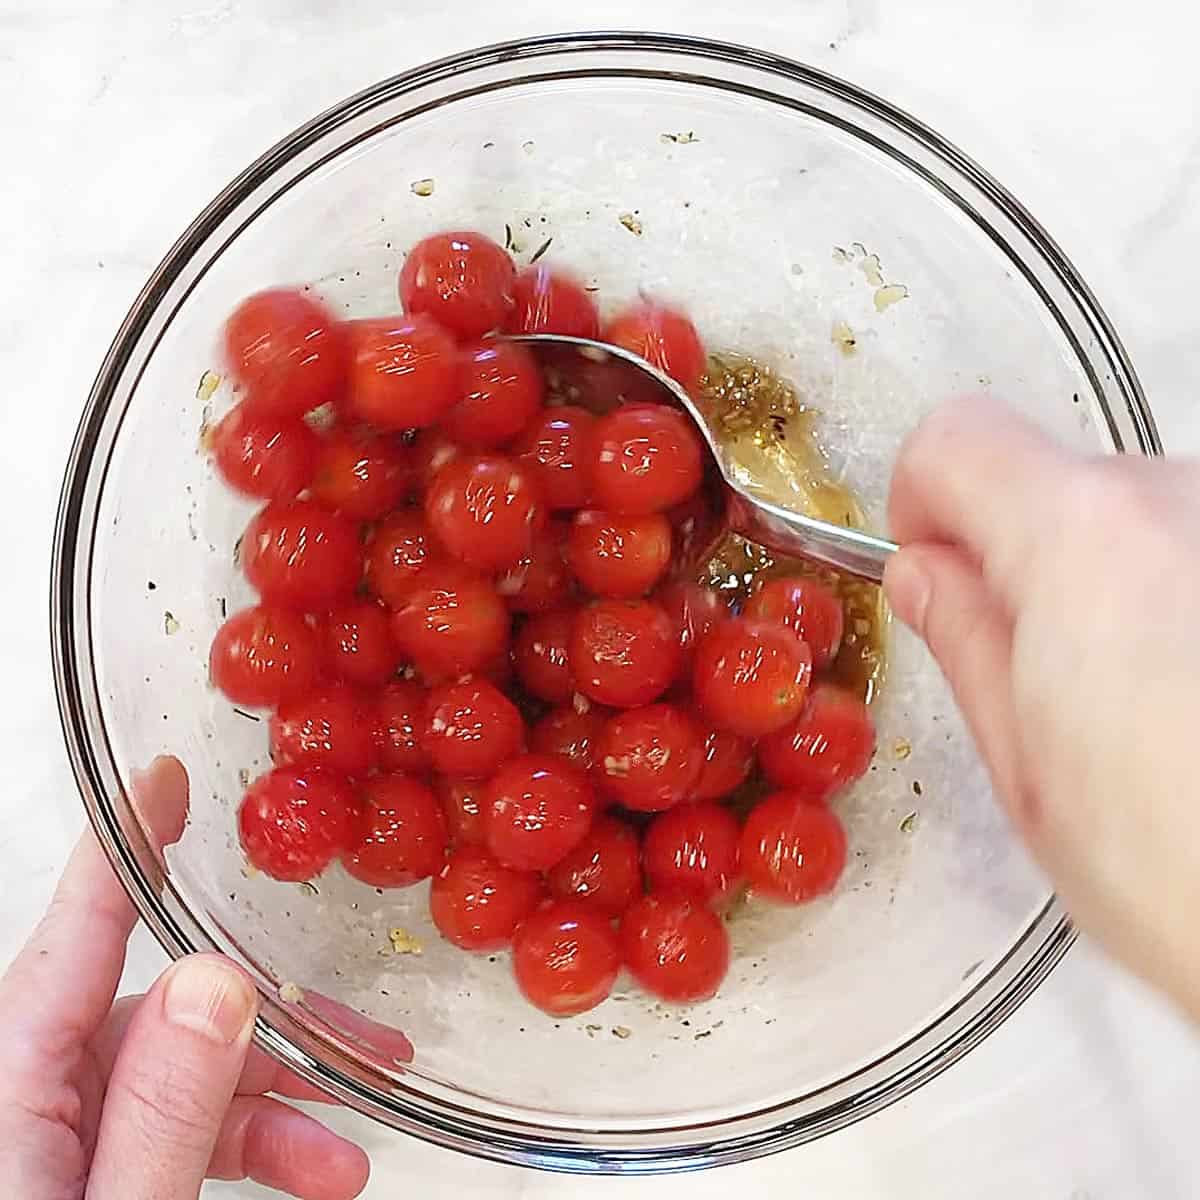 Mixing cherry tomatoes and seasonings in a bowl.